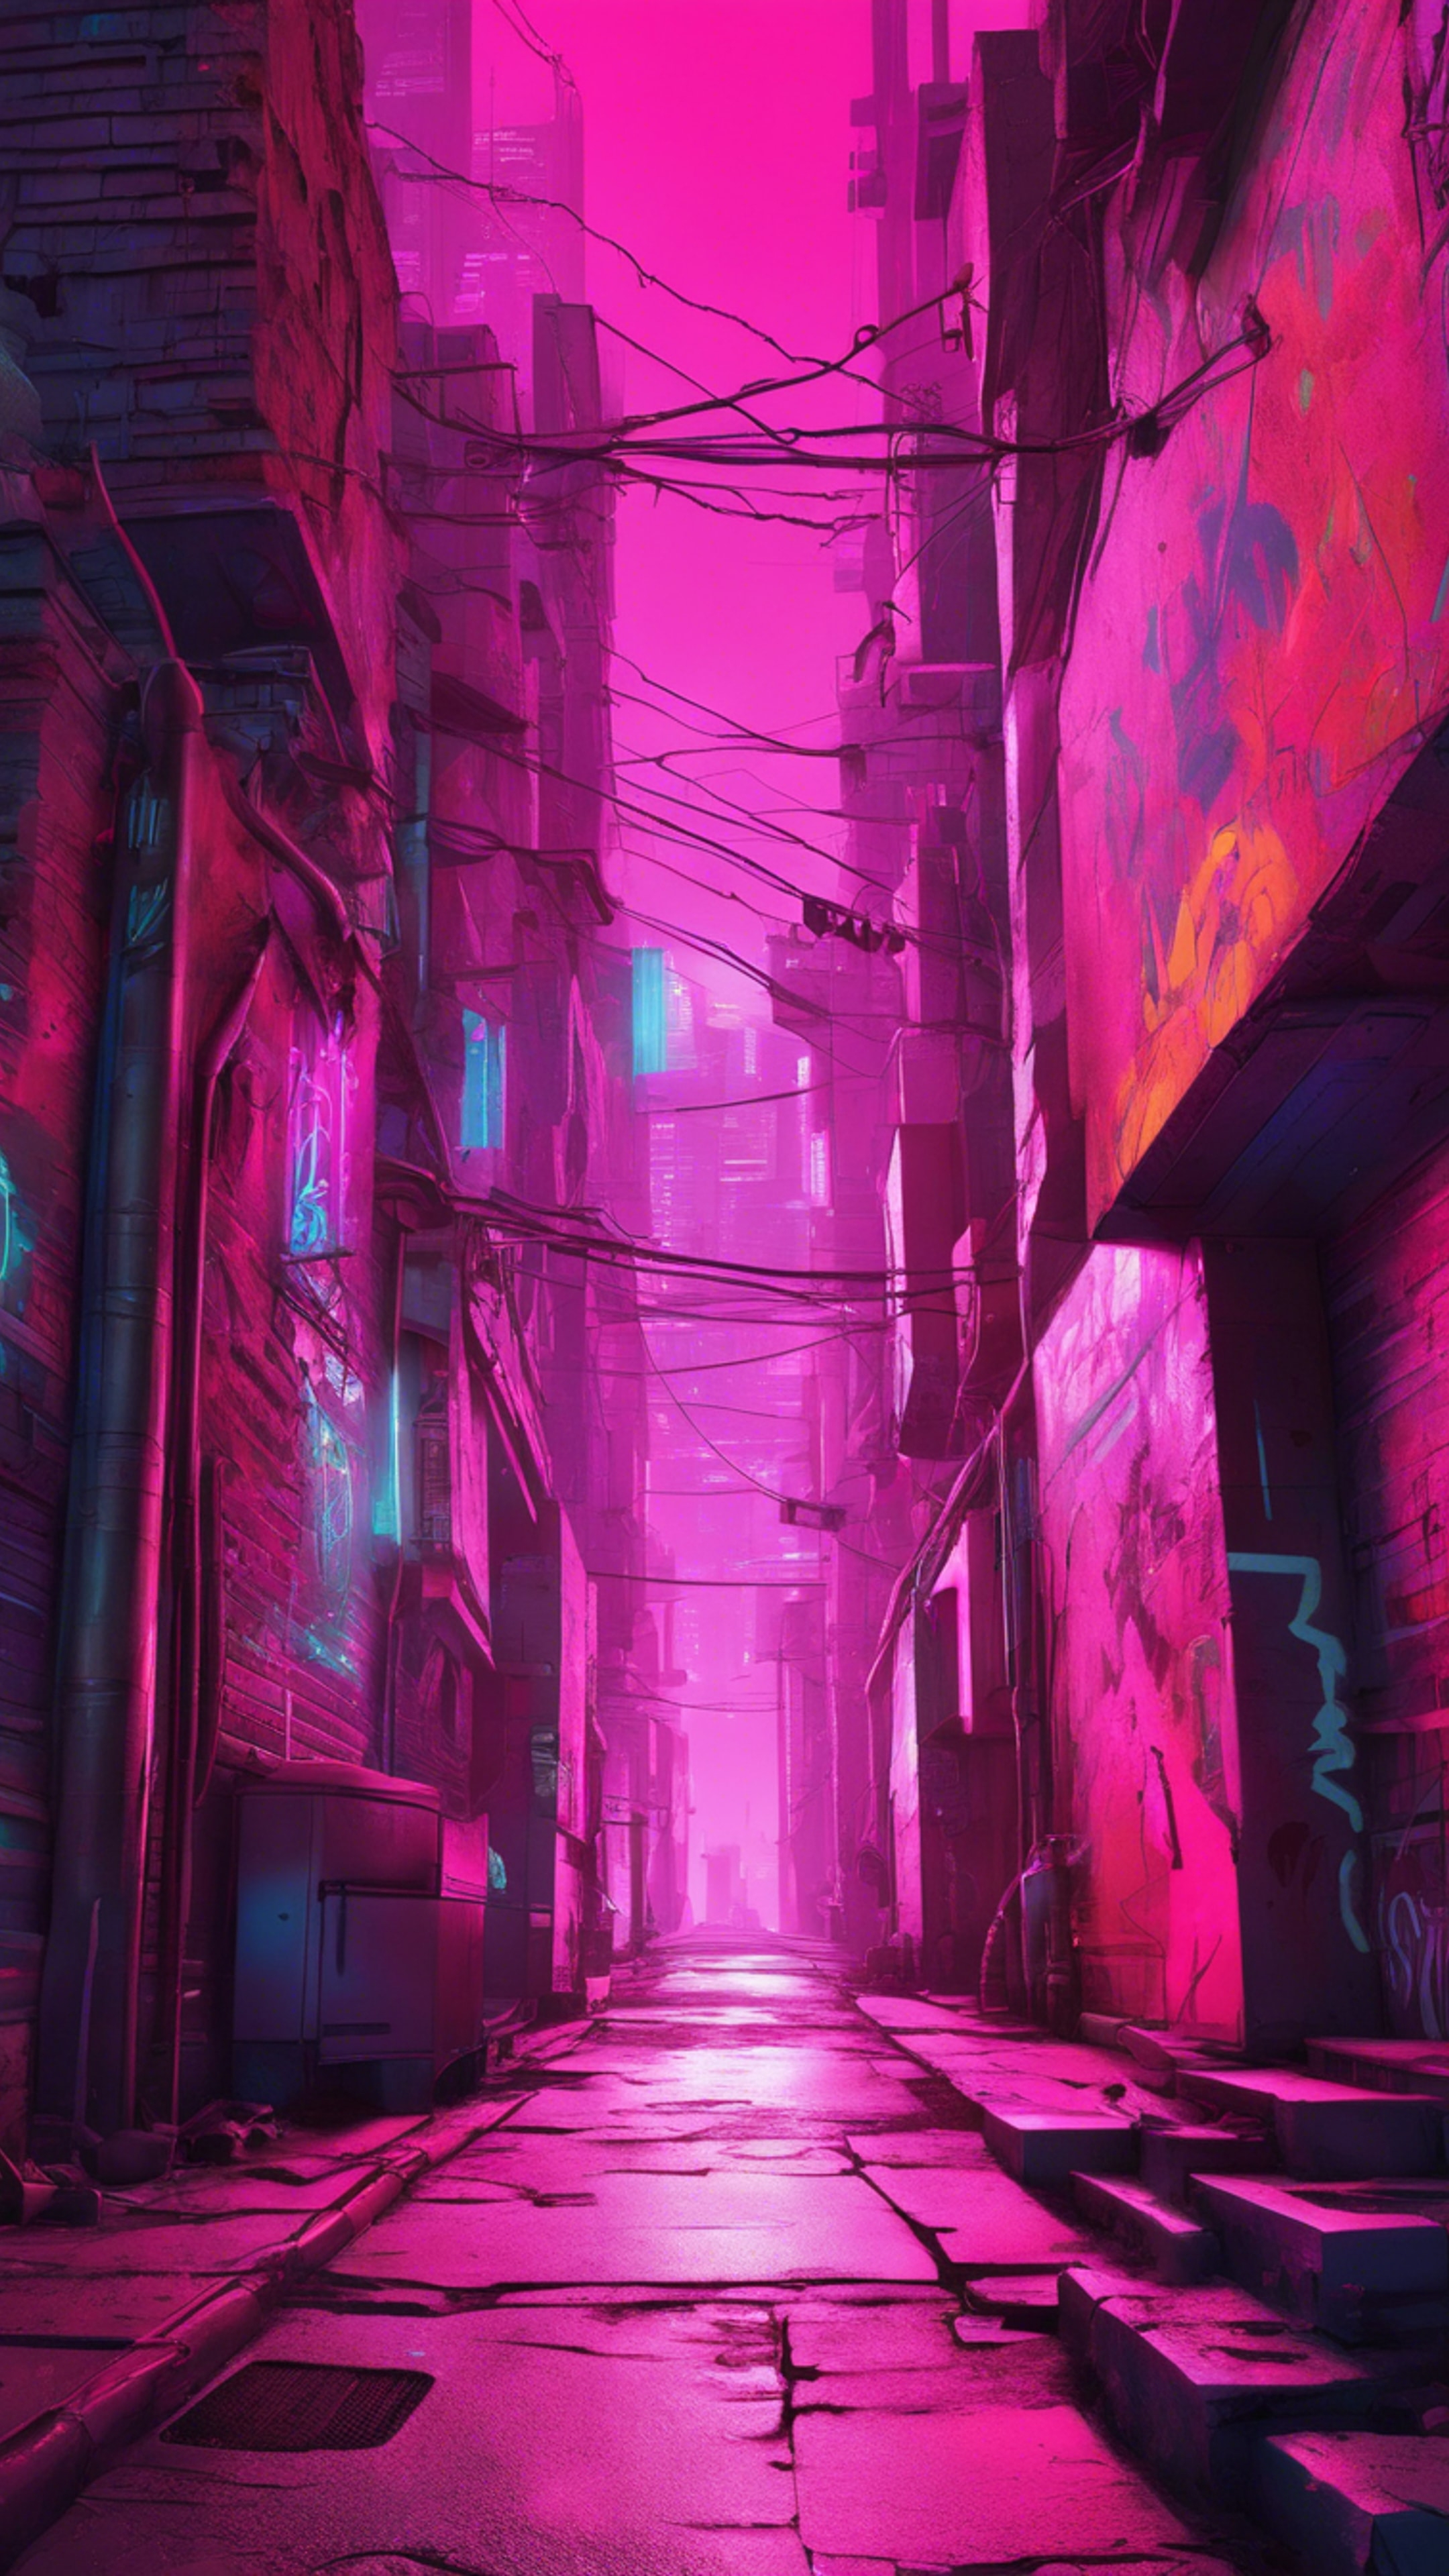 A neon-lit city alley at midnight, with bright pink graffiti on the walls, radiating a cyberpunk aura. Papel de parede[6a5b63b1eaec4ac98291]